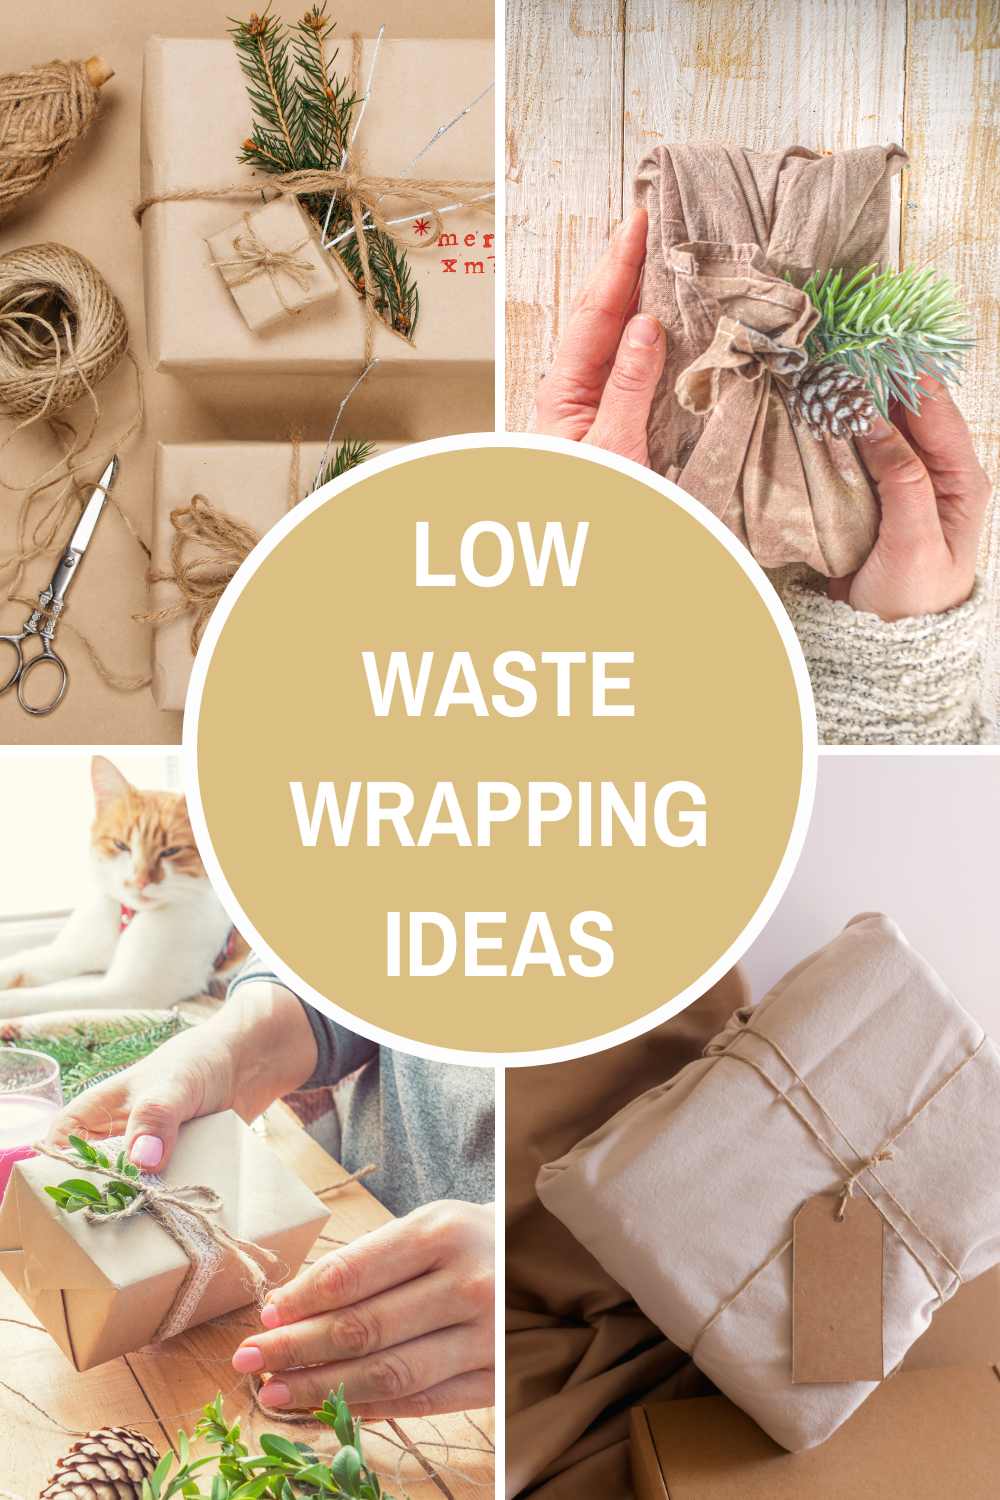 Eco friendly gift wrapping. Text overlay: Green gifting - beautiful, eco friendly gift wrapping ideas!